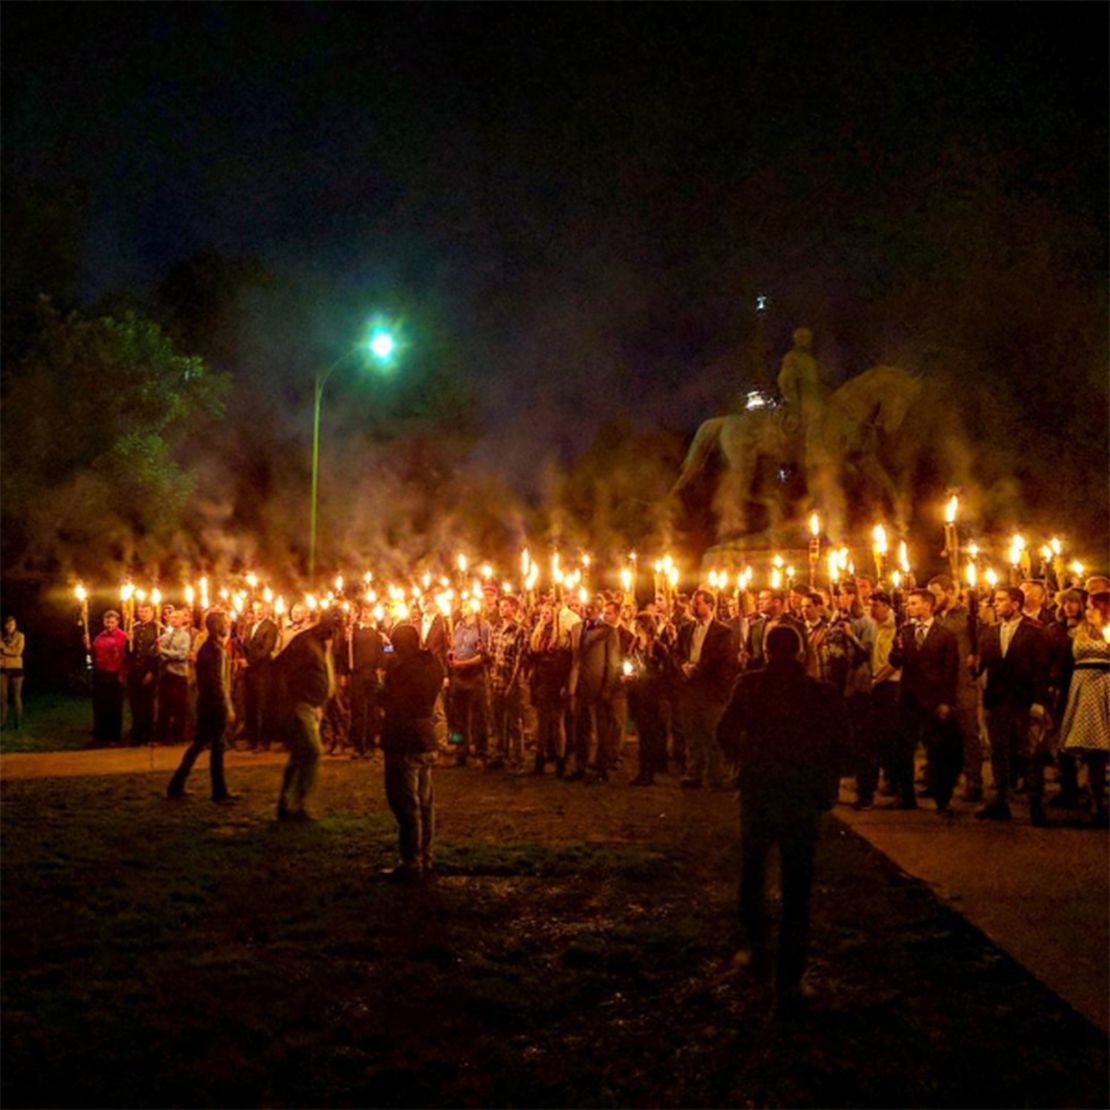 The torch-lit protest at the Robert E. Lee statue from May 2017, a precursor to the deadly Unite the Right rally.